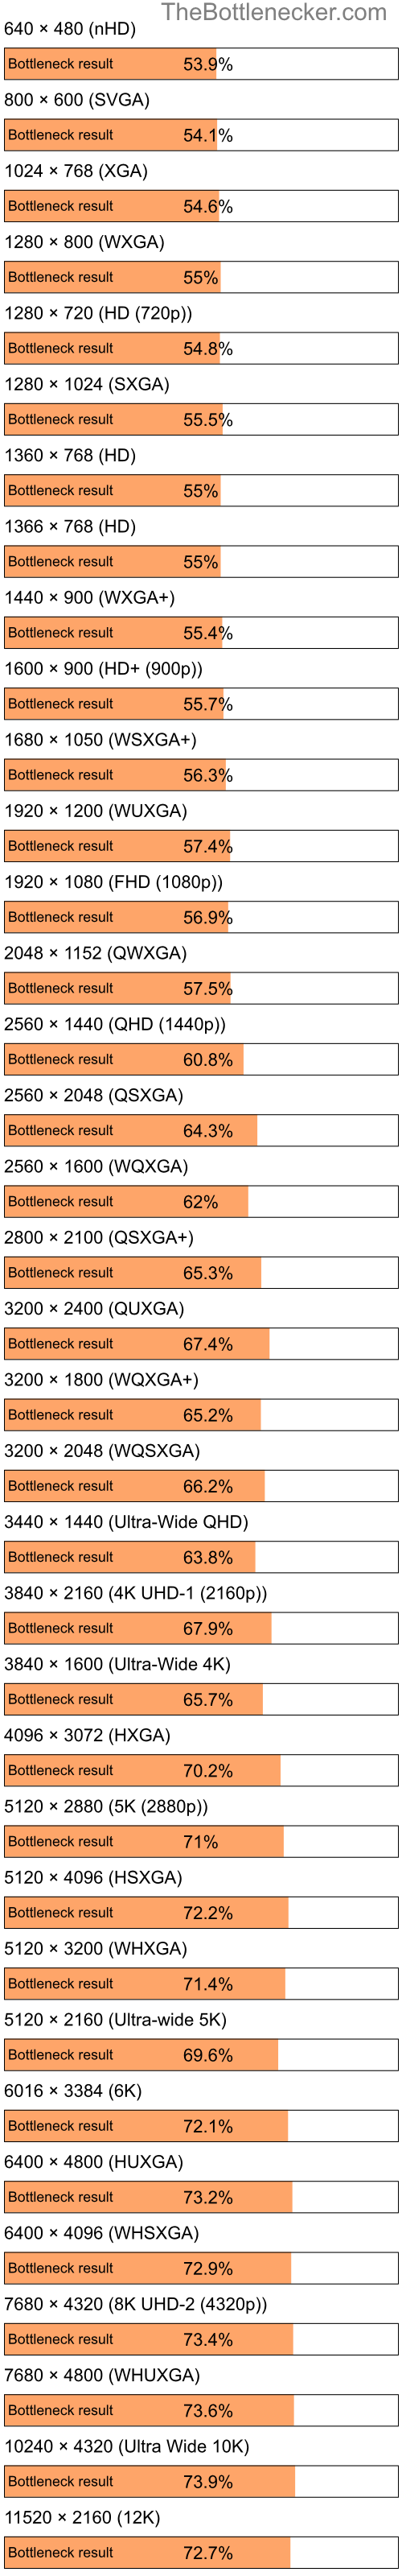 Bottleneck results by resolution for Intel Atom N280 and AMD Radeon HD 6290 in Processor Intense Tasks